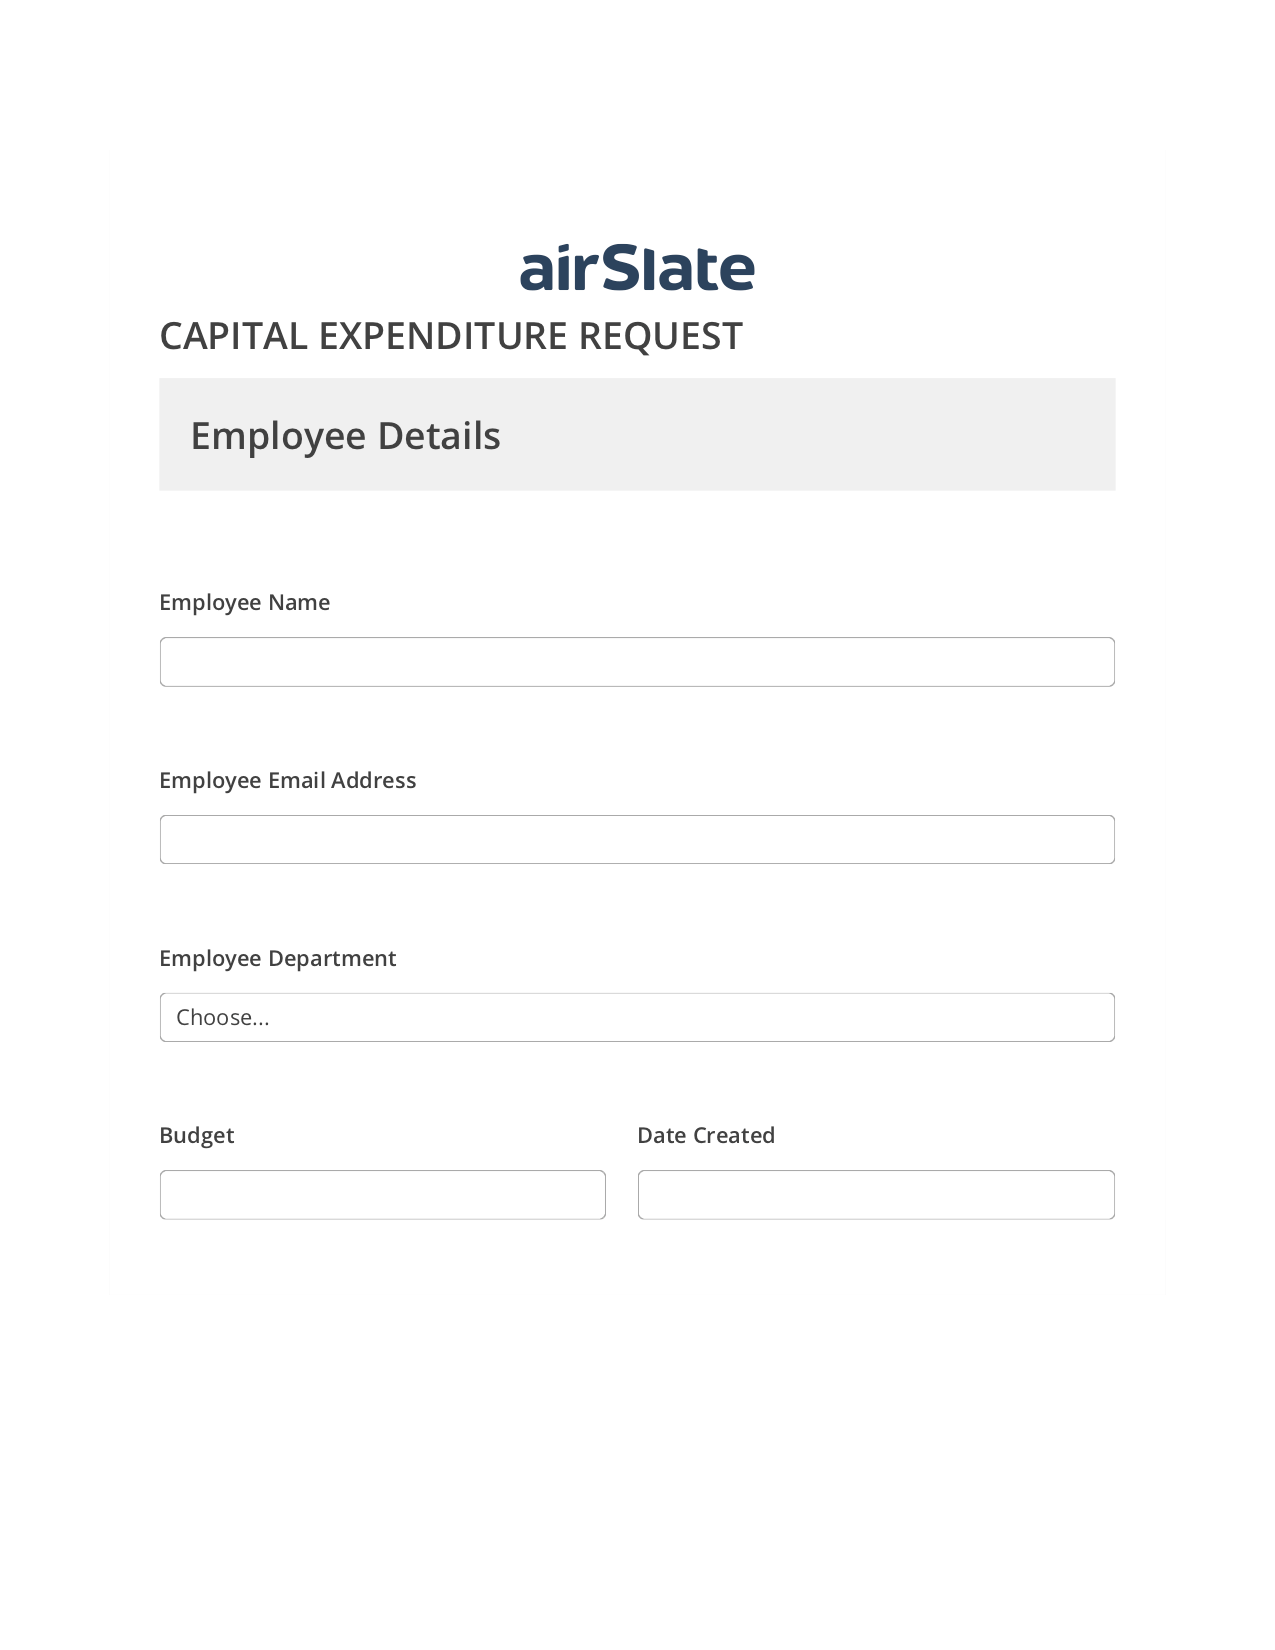 Capital Expenditure Request Approval Flow Pre-fill from CSV File Bot